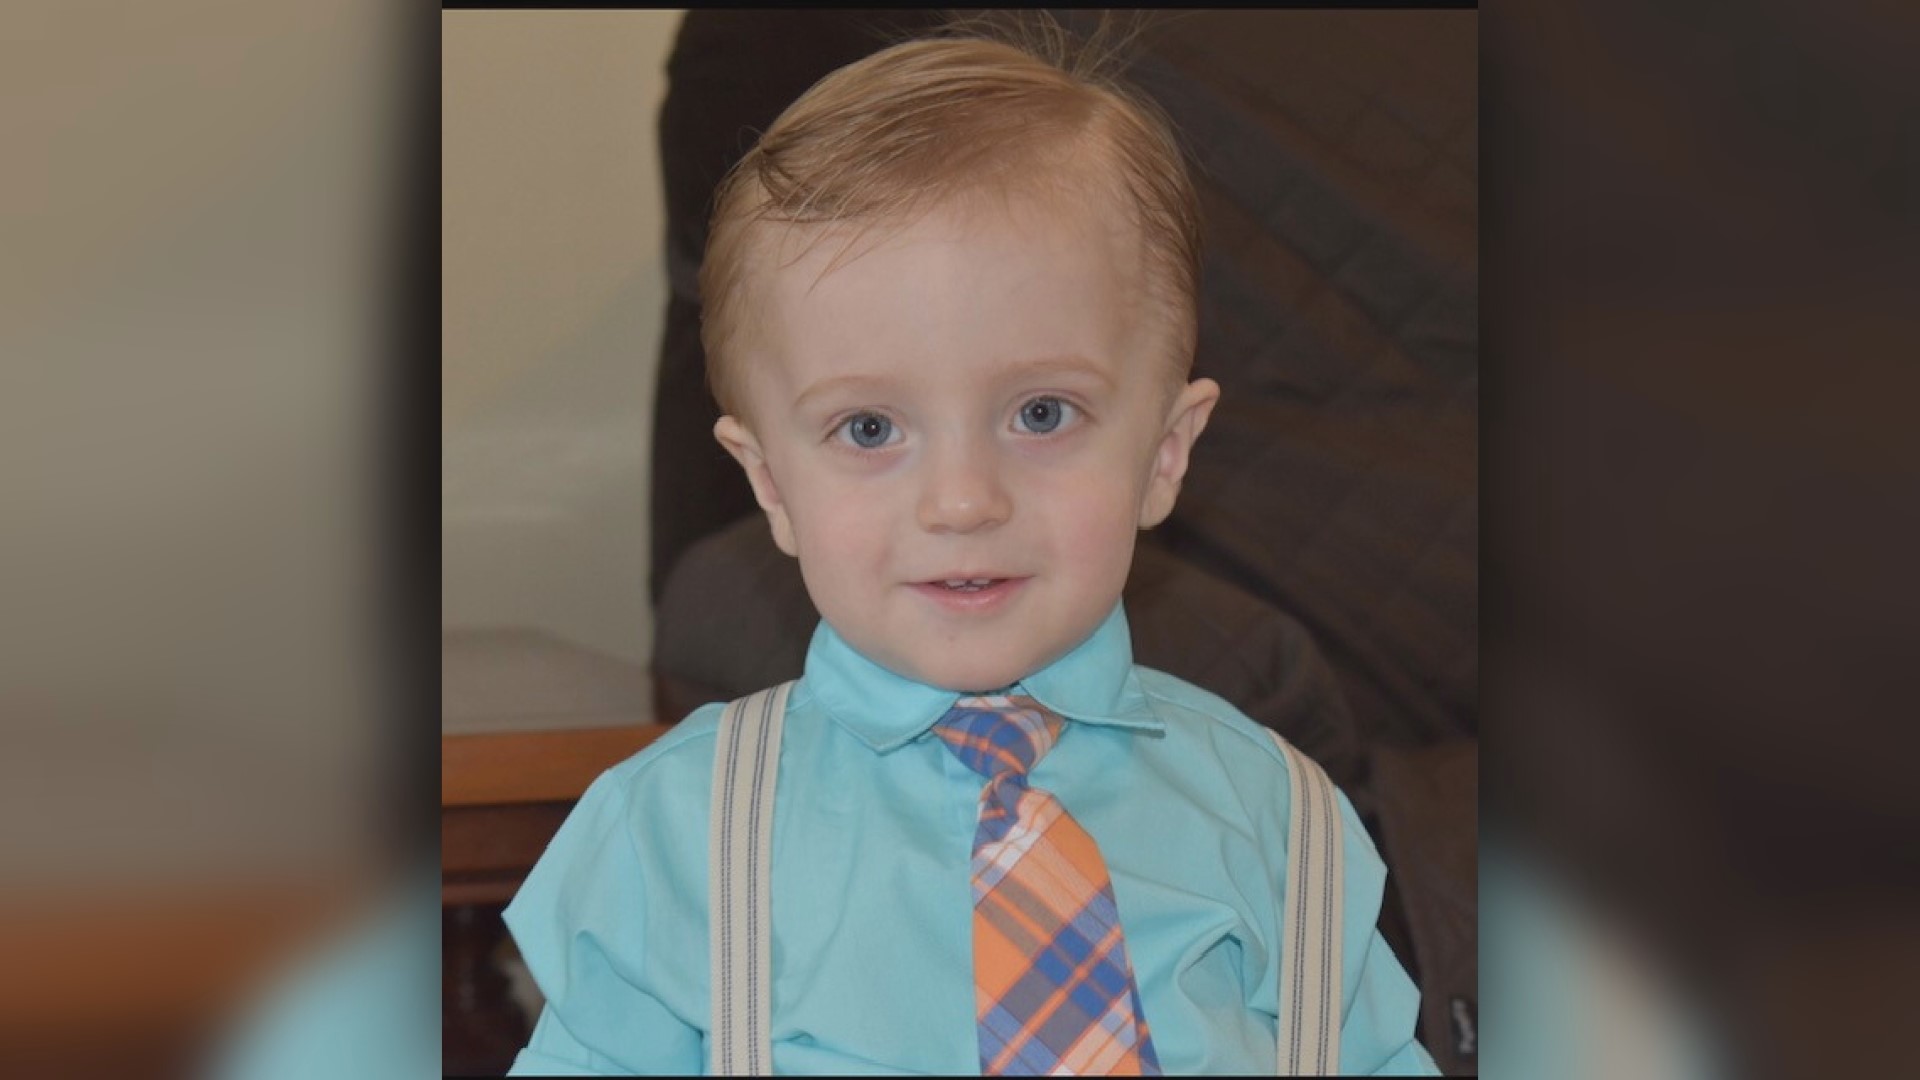 Friends are holding a bone marrow drive Saturday, Nov. 6, in honor of Jack Fadeley of West Seneca who is fighting for his life after complications from RSV.